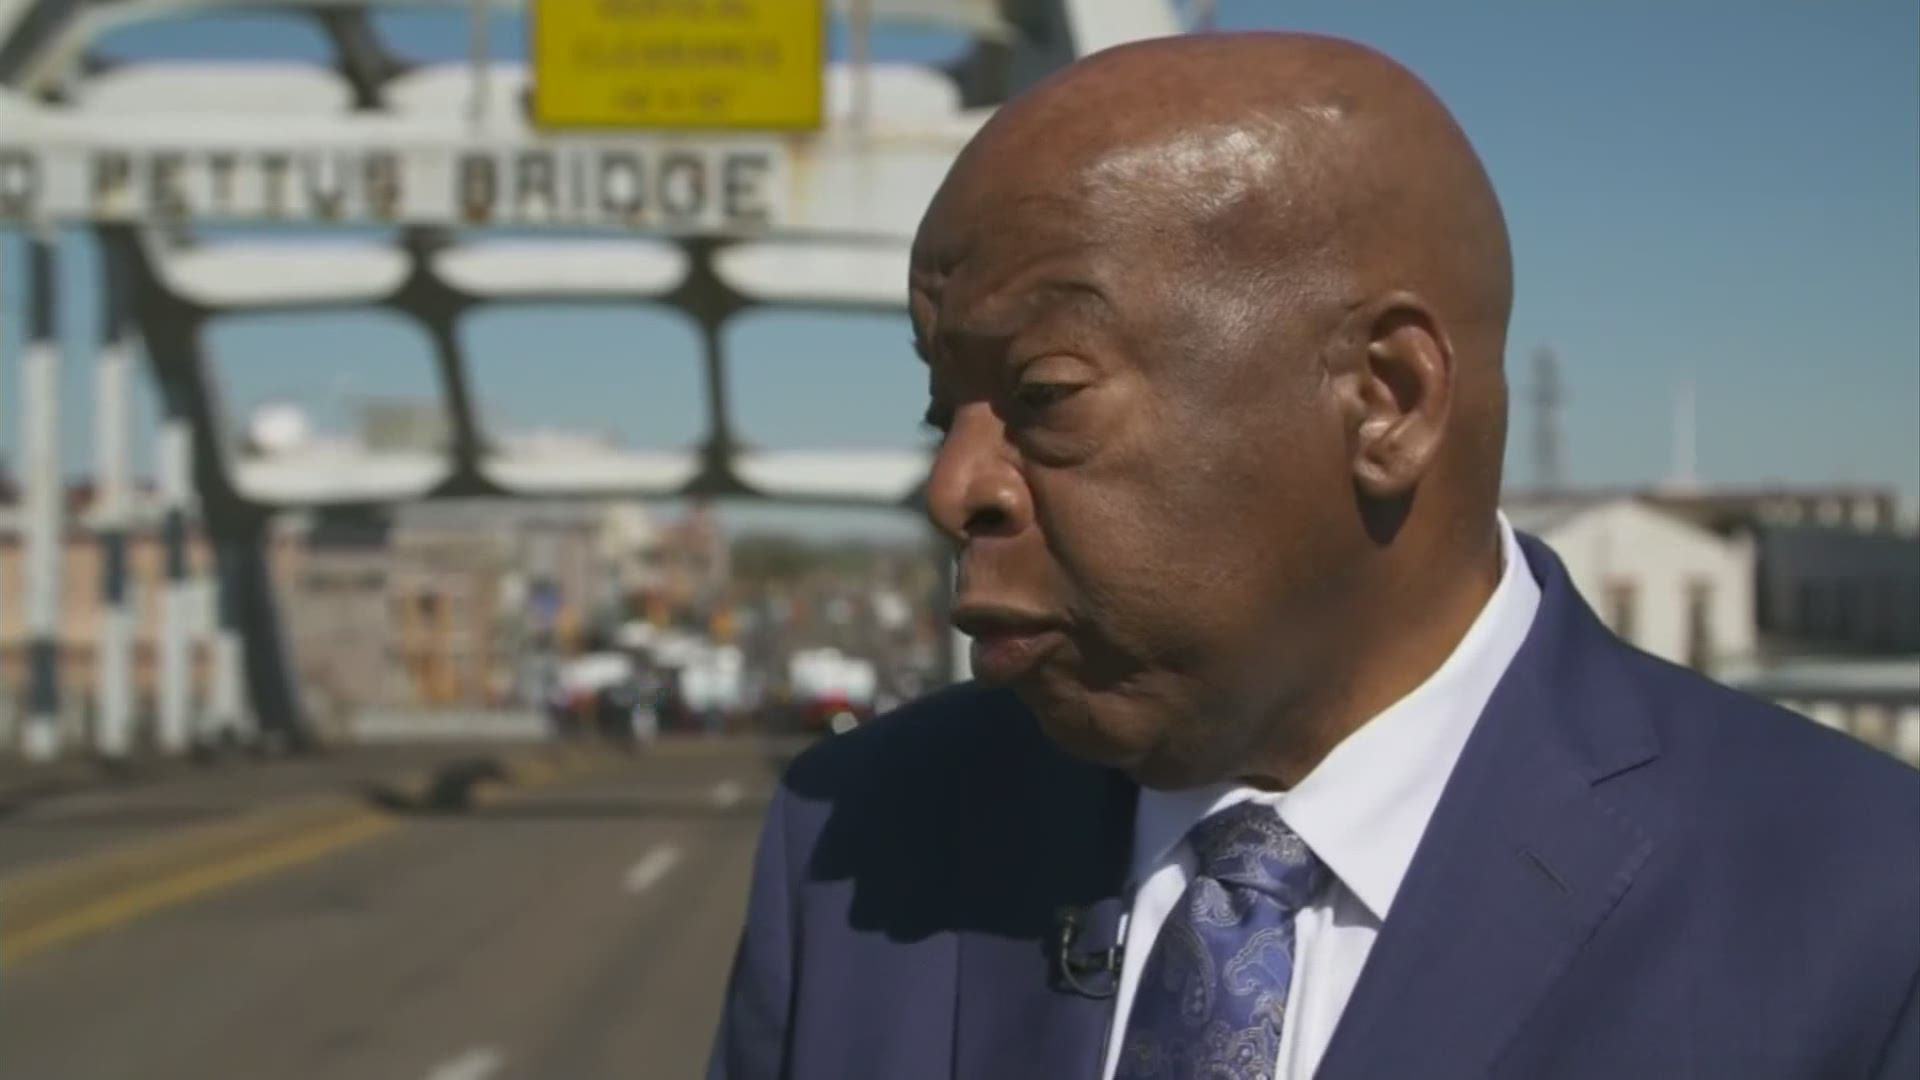 Local reaction action to loss of Representative and Civil Rights Activist John Lewis